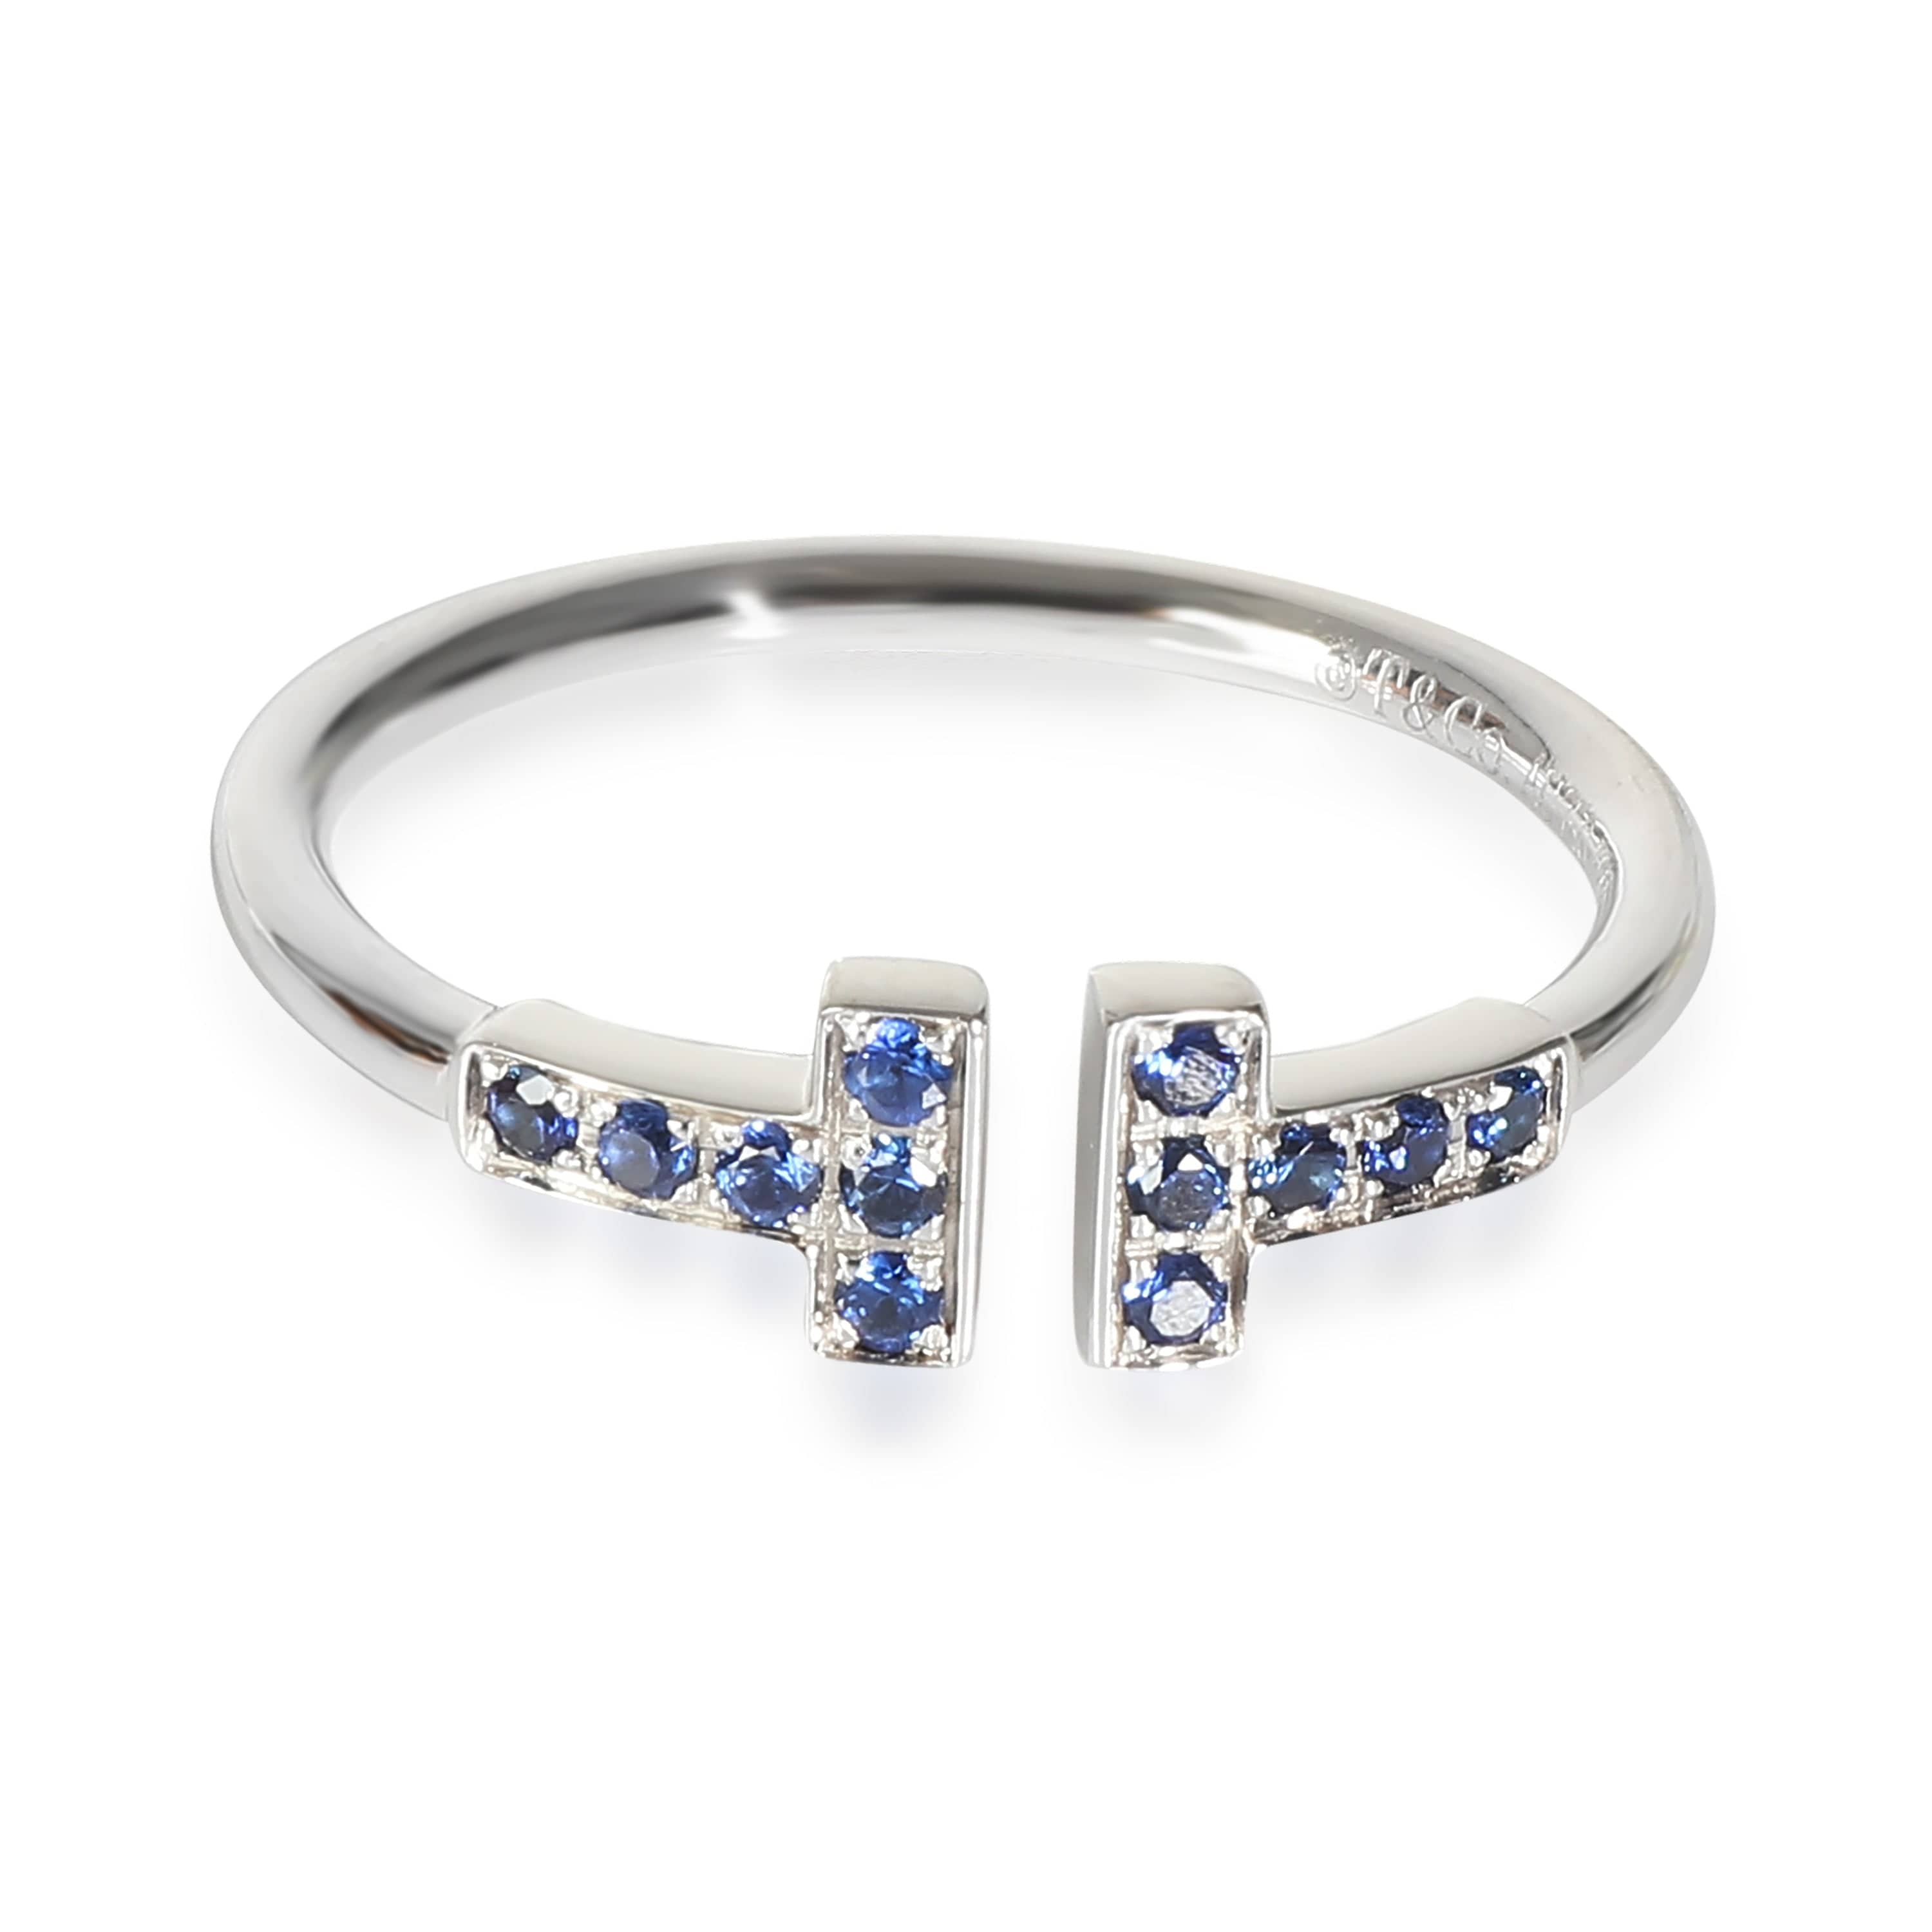 Tiffany & Co. T Wire Blue Sapphire Ring in 18k White Gold 0.14 CTW